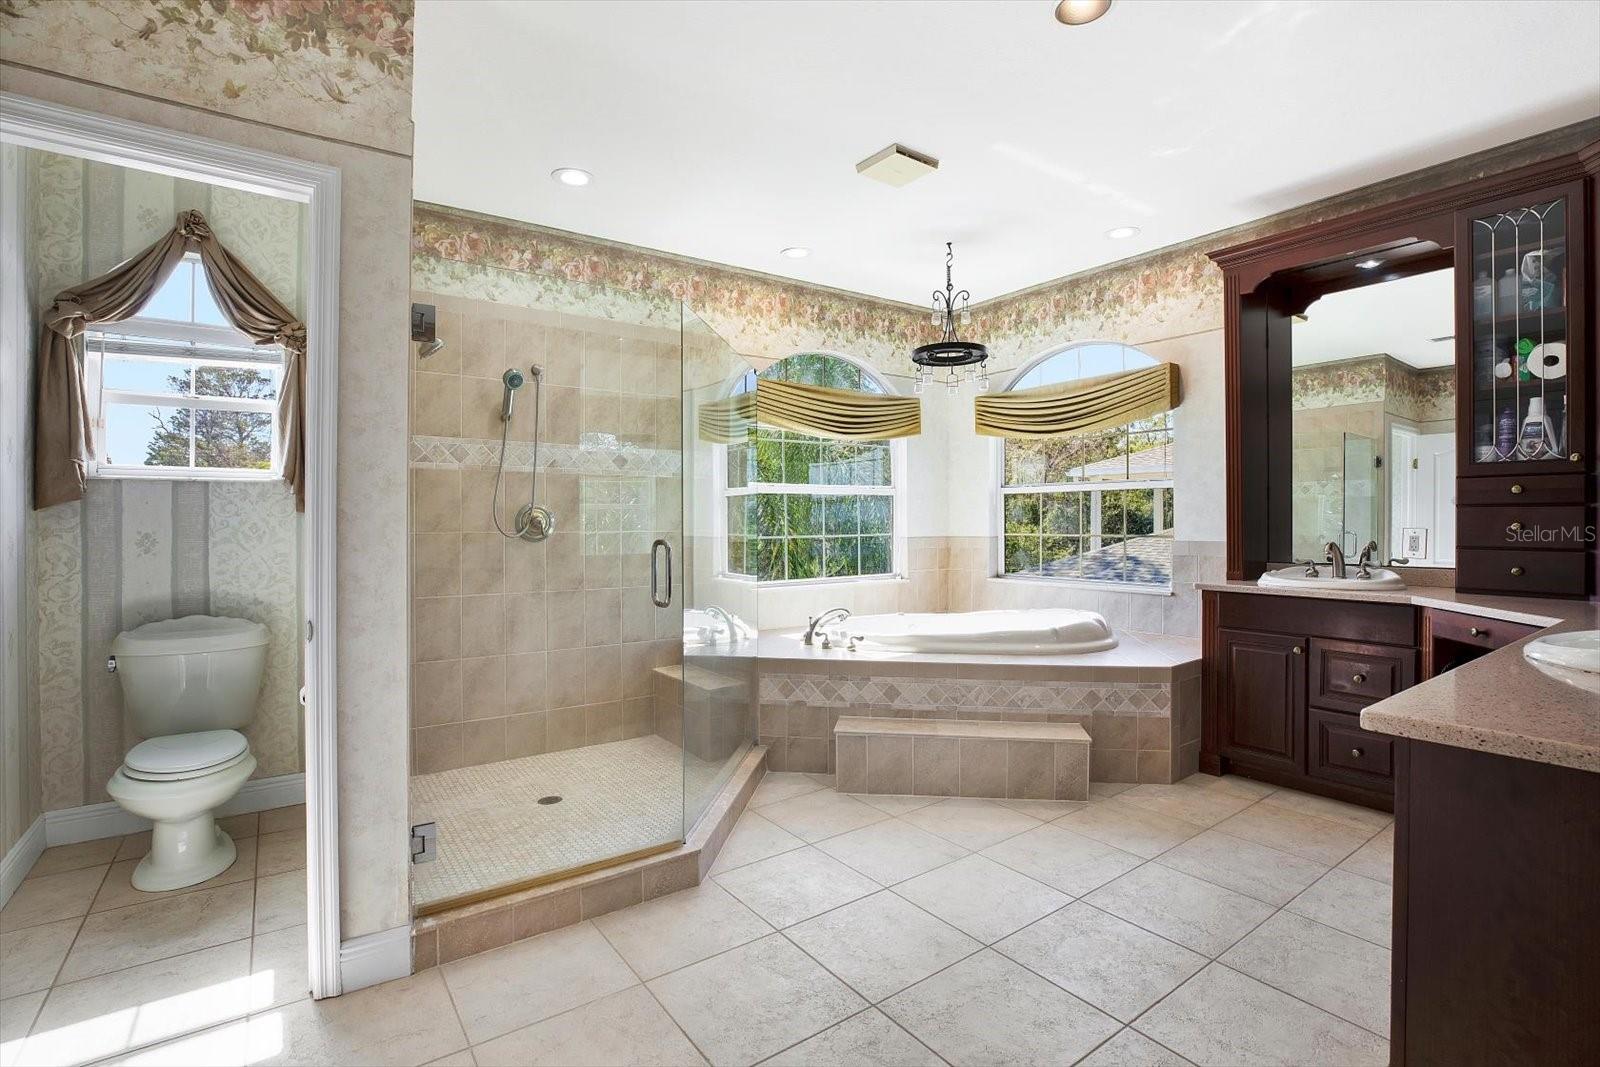 Are you a tub or shower person? The primary bathroom offers the best of both worlds